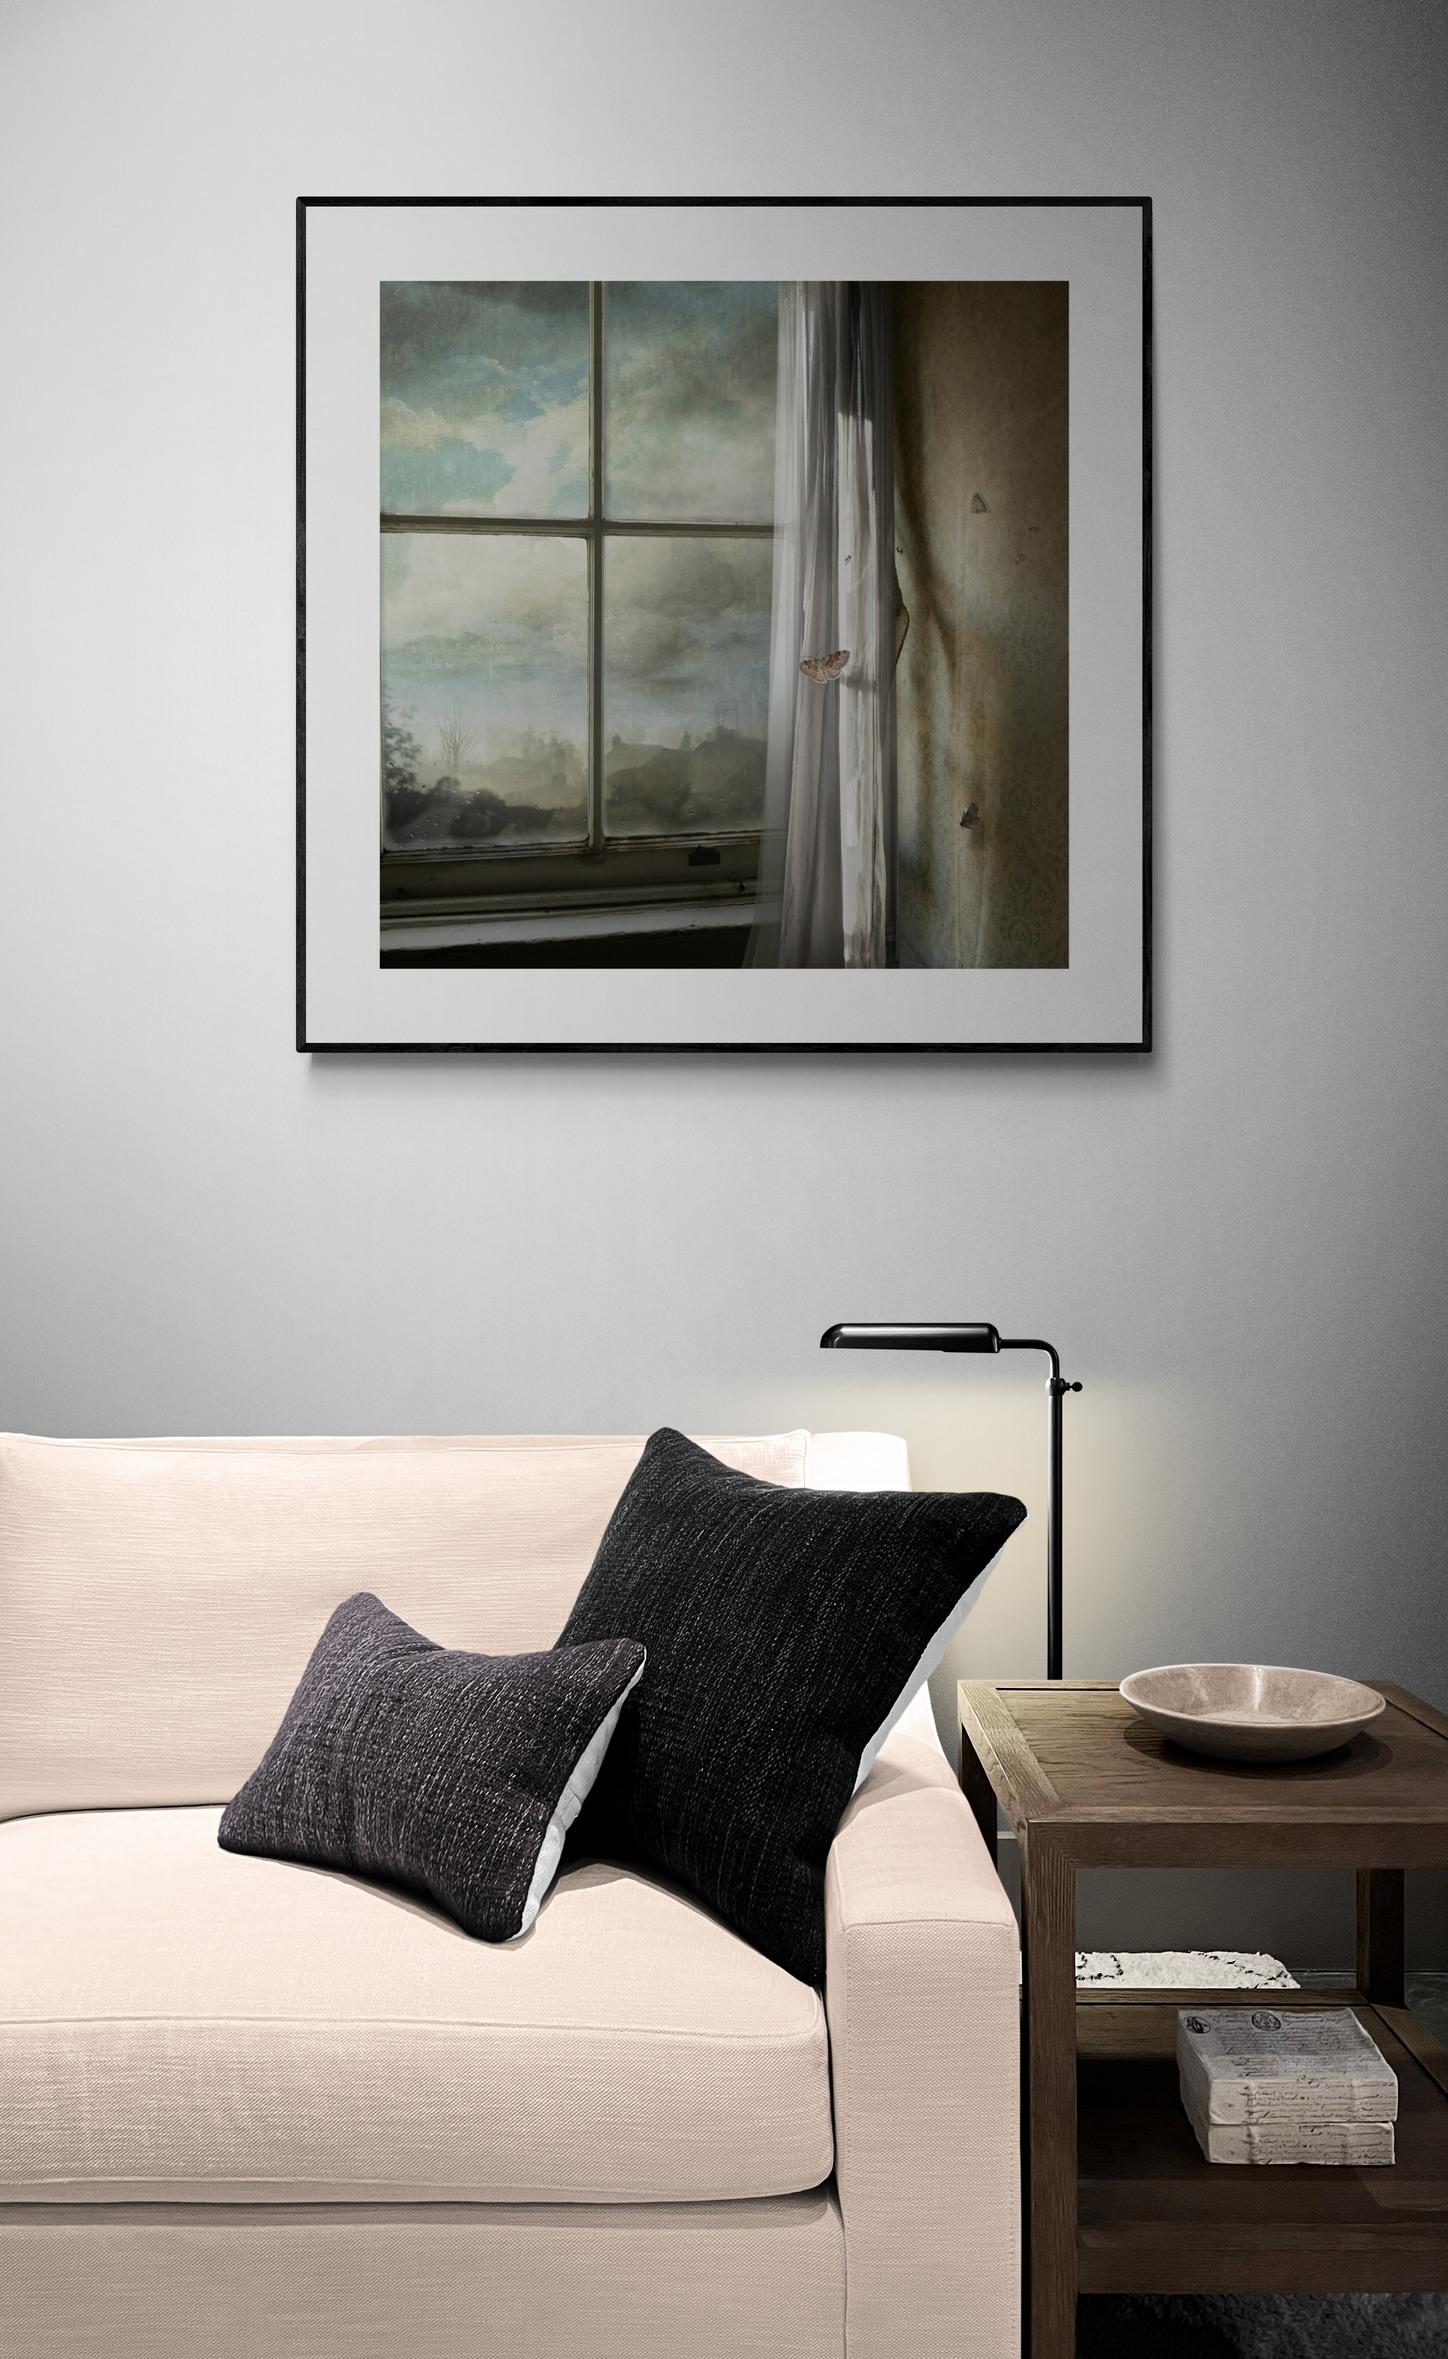 Aspect - Interior Photography, Butterfly Window, Landscape Photography - Contemporary Print by Suzanne Moxhay